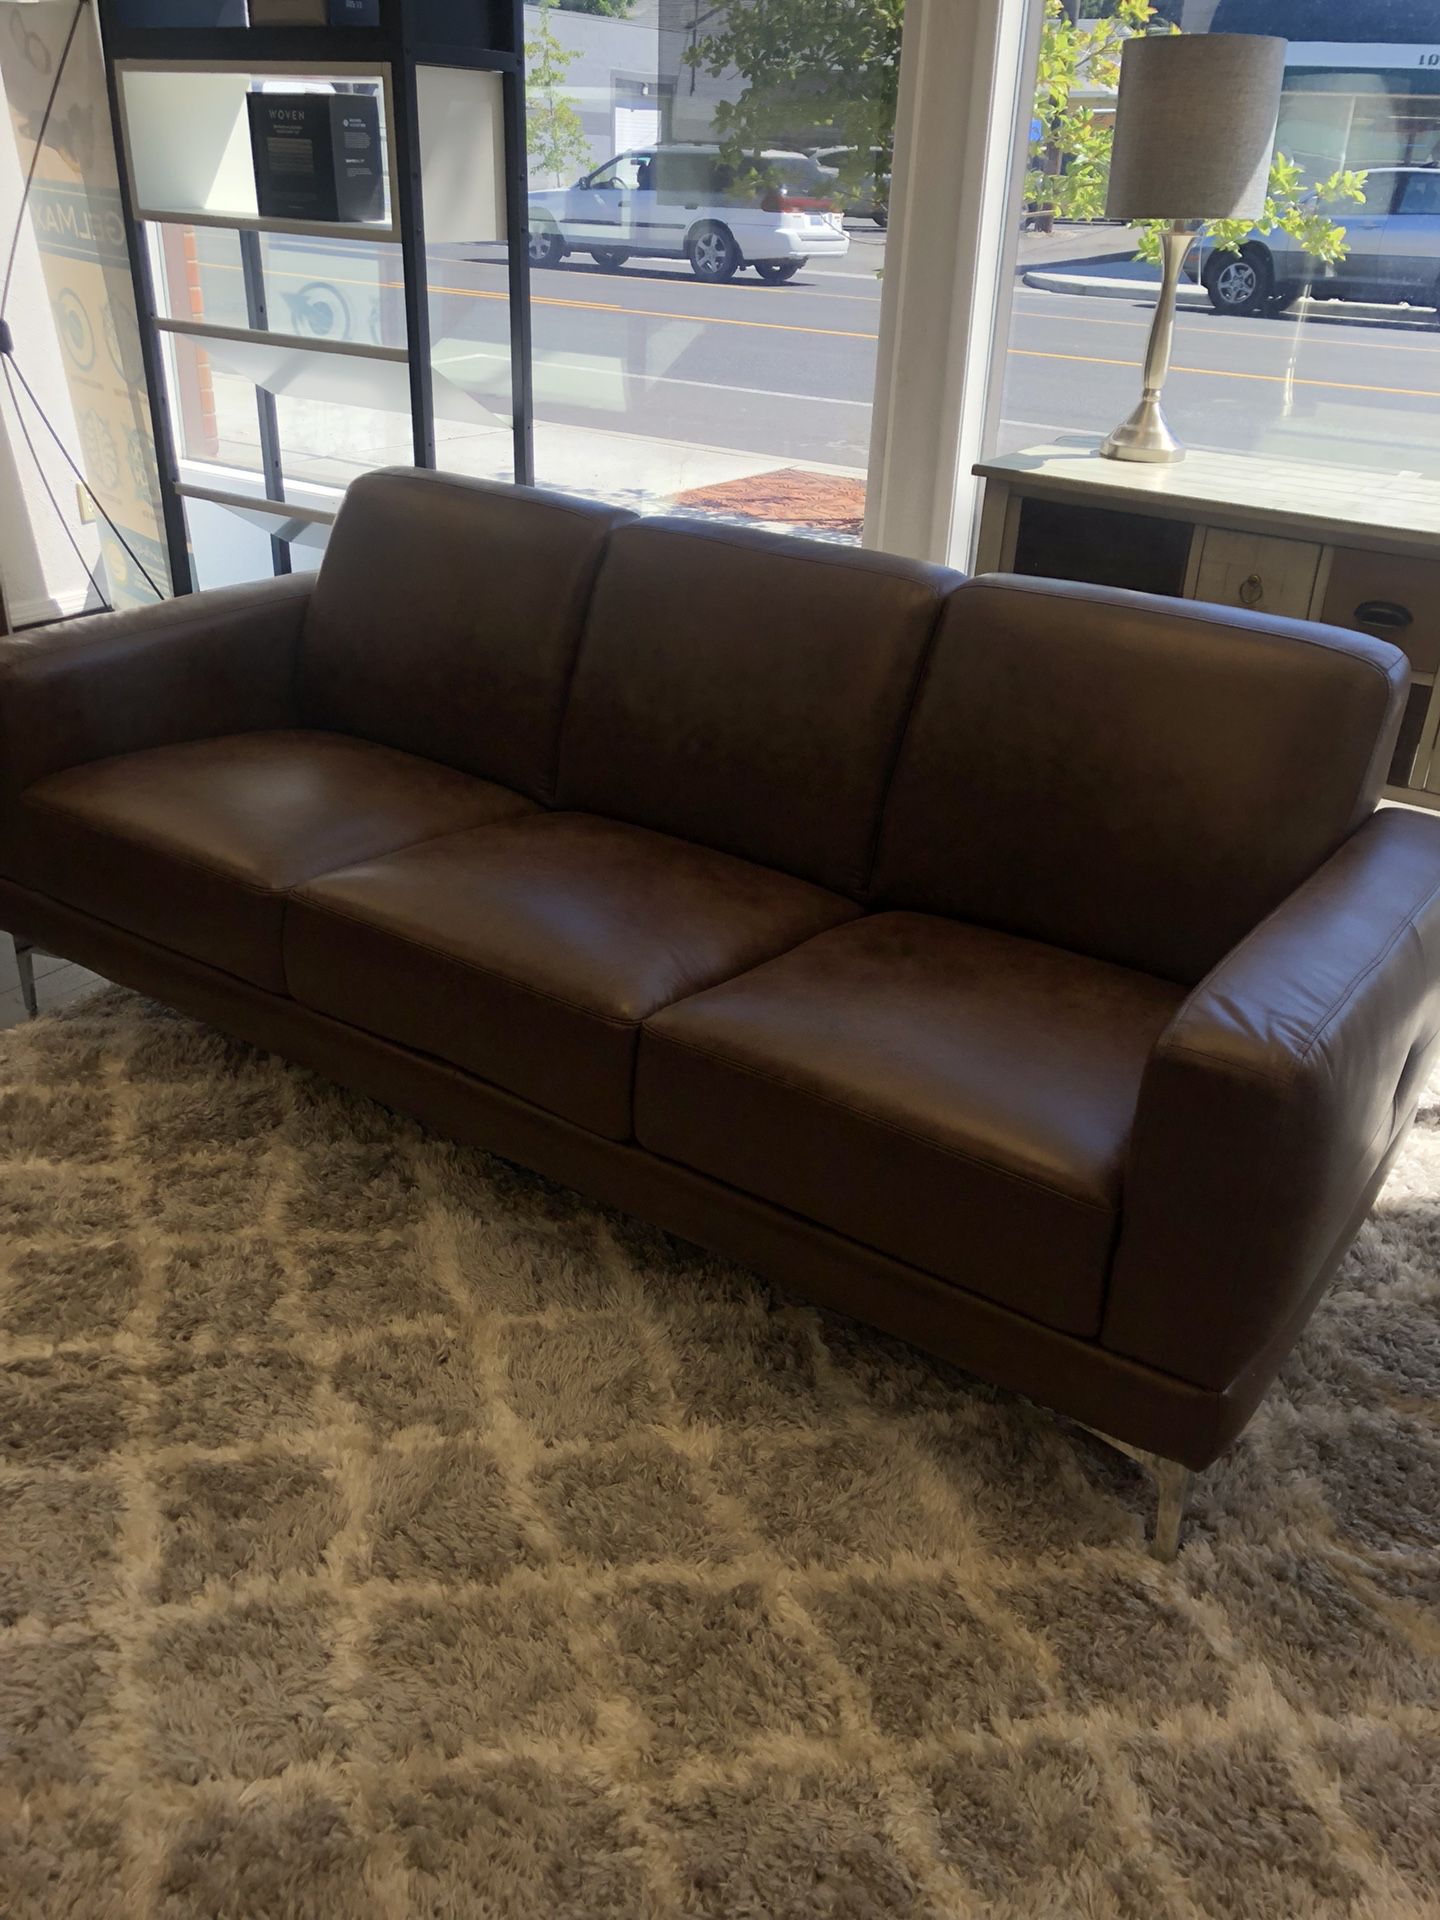 Brown leather couch $40 down